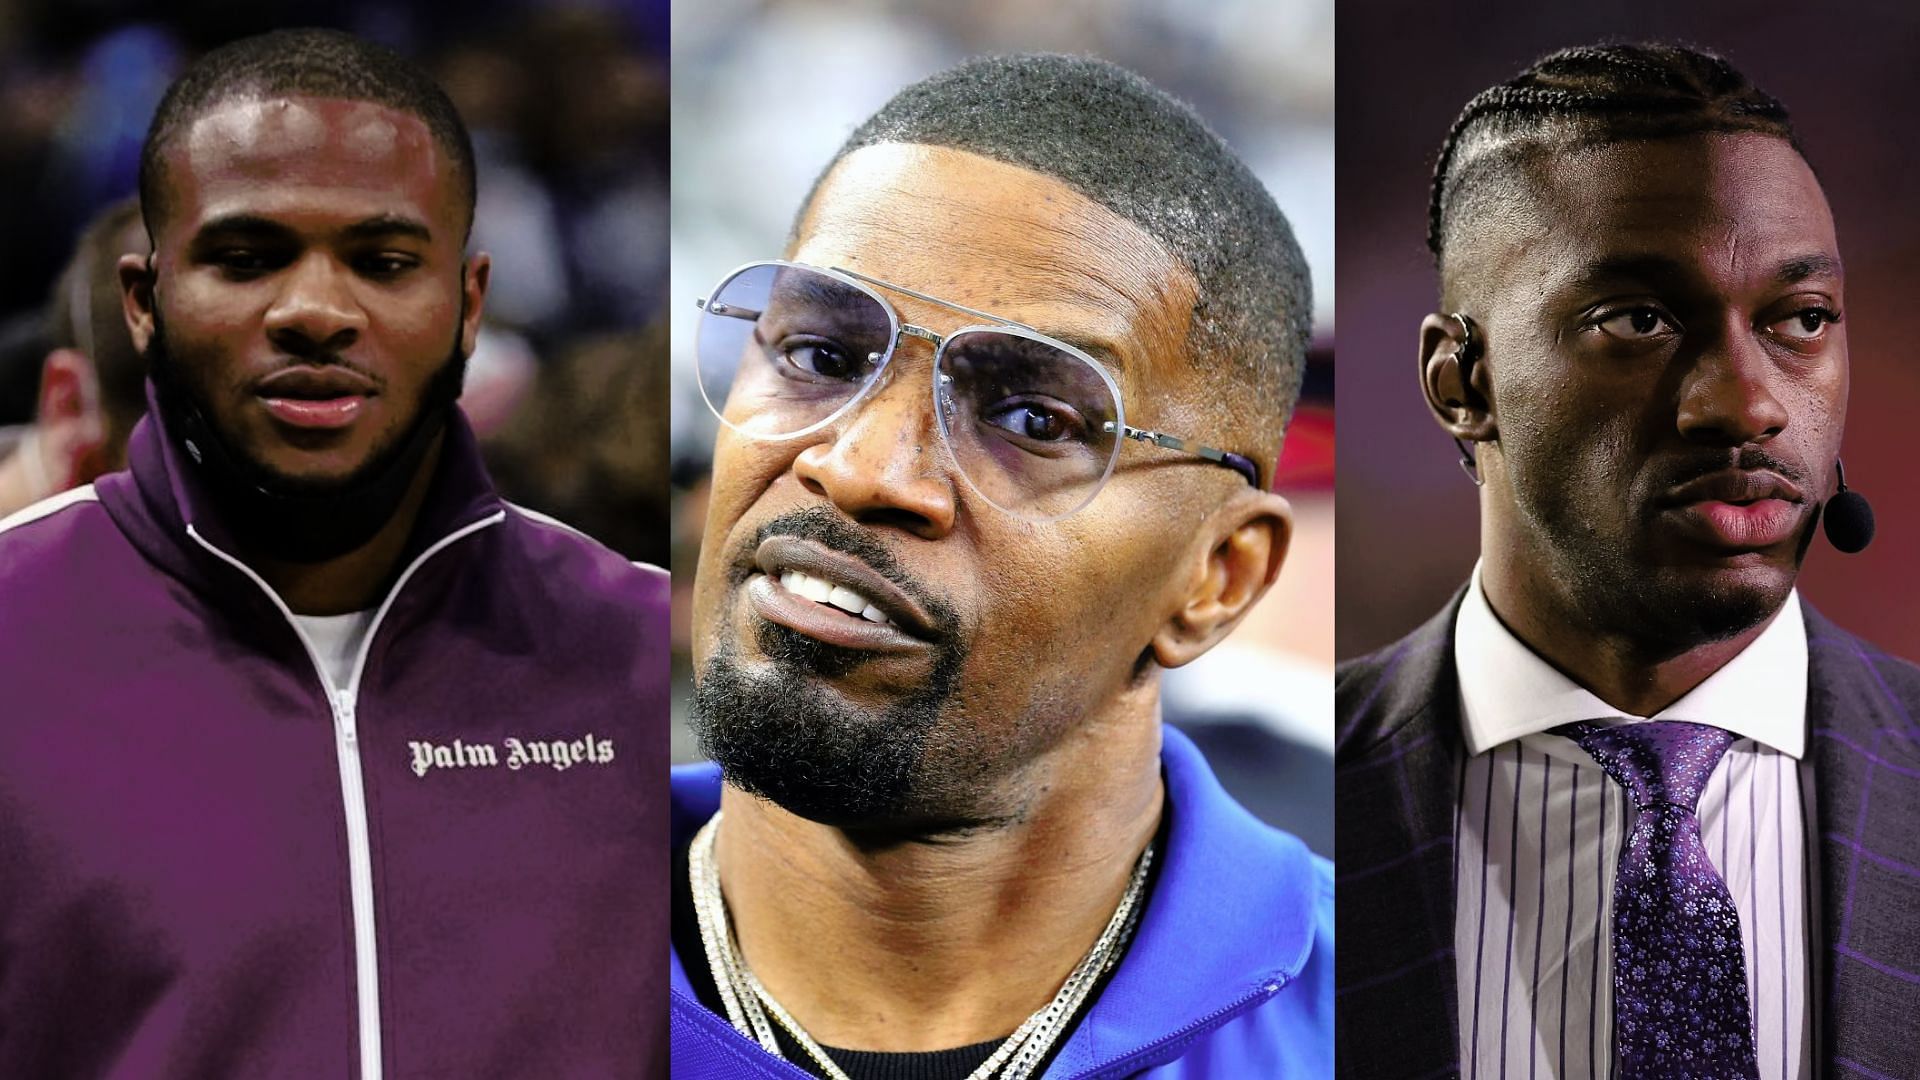 Micah Parsons and Robert Griffin III are offering prayers for Jamie Foxx